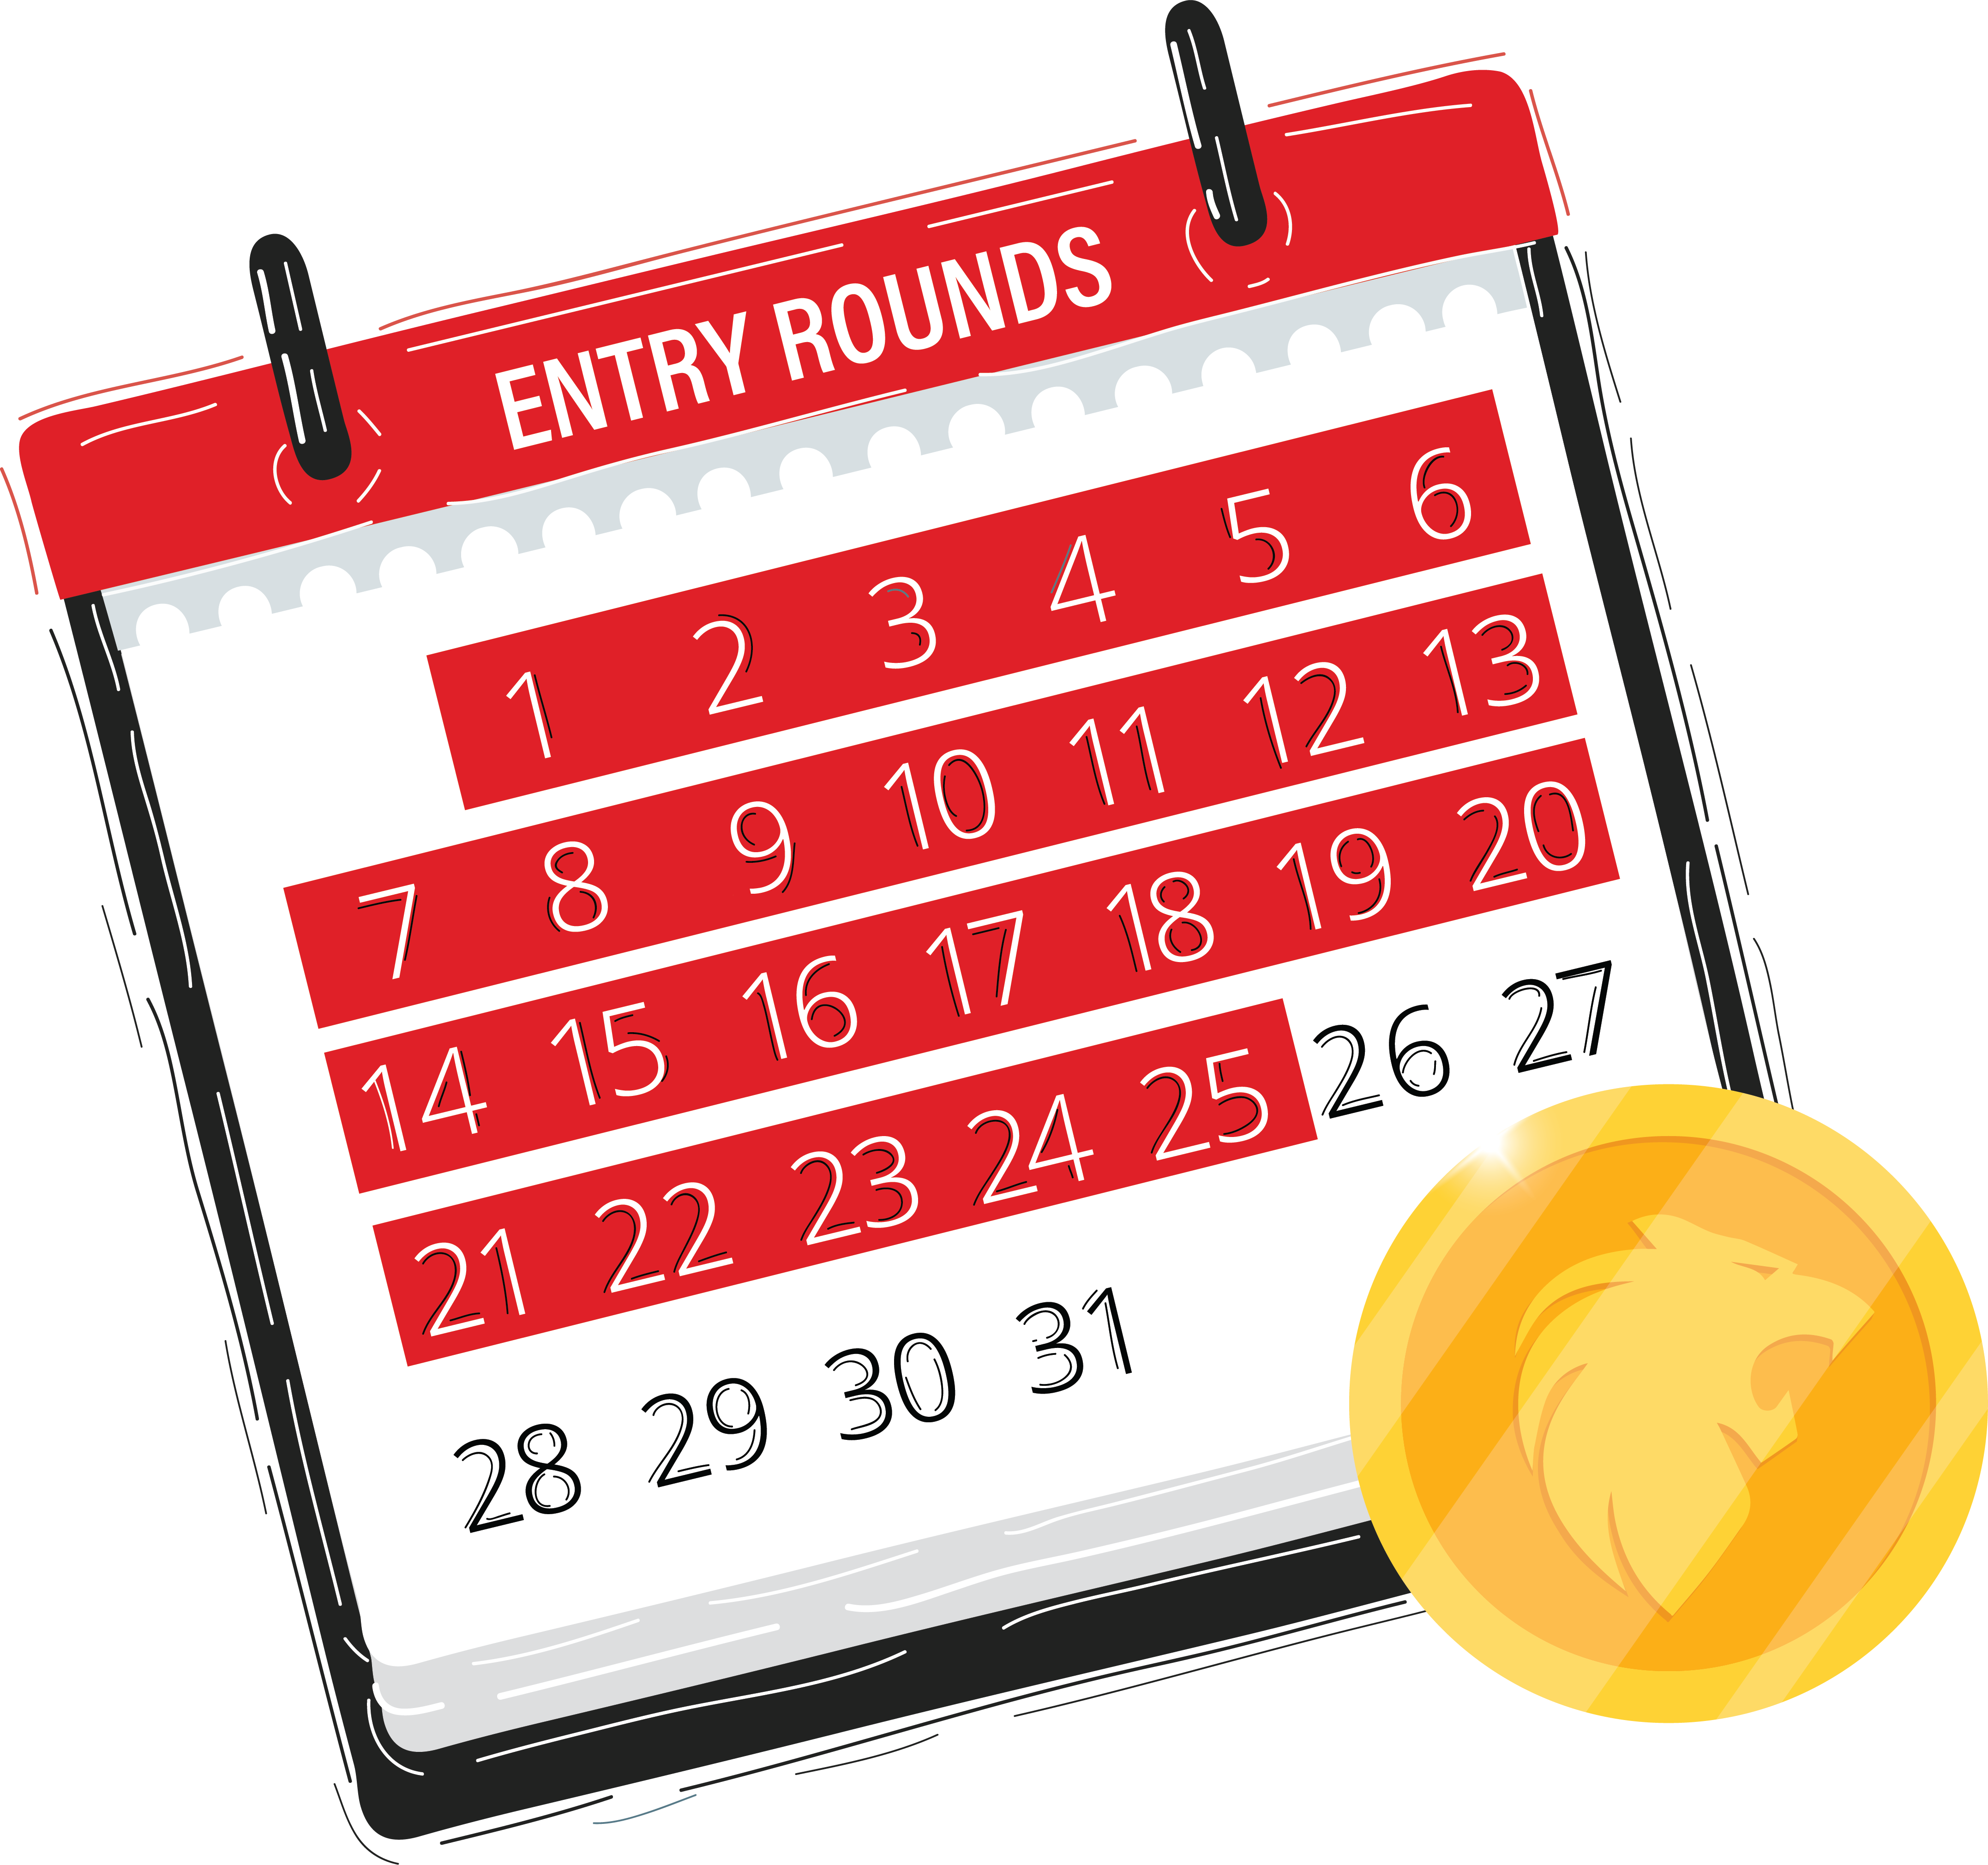 Entry Rounds Image